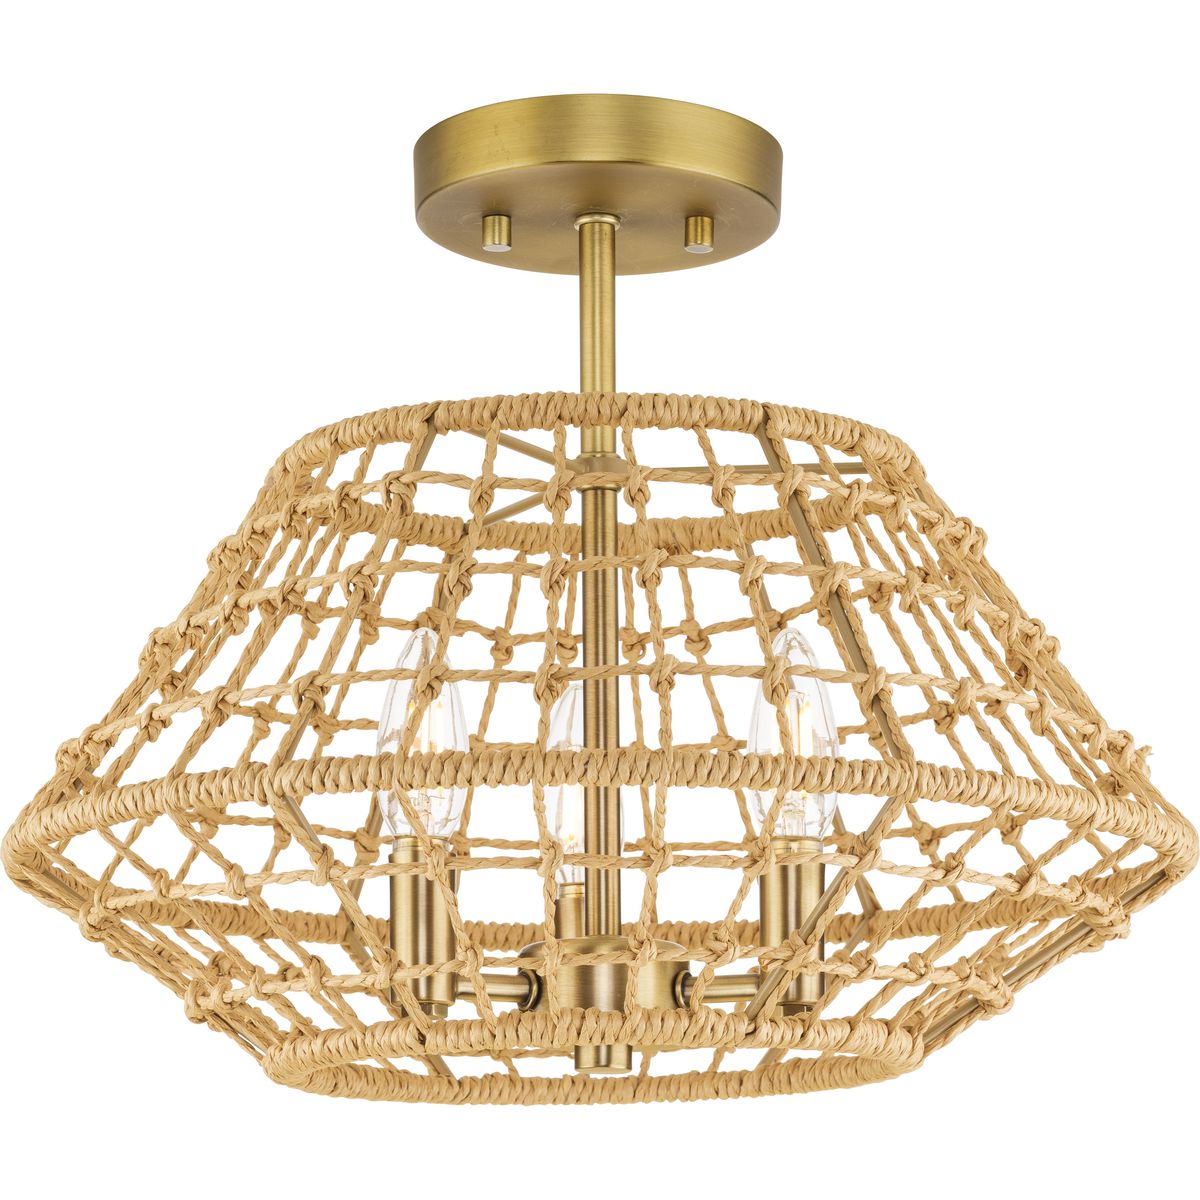 PROGRESS LIGHTING P350246-163 Vintage Brass Laila Collection 16 in. Three-Light Vintage Brass Coastal Semi-Flush Convertible with Woven Jute Accents